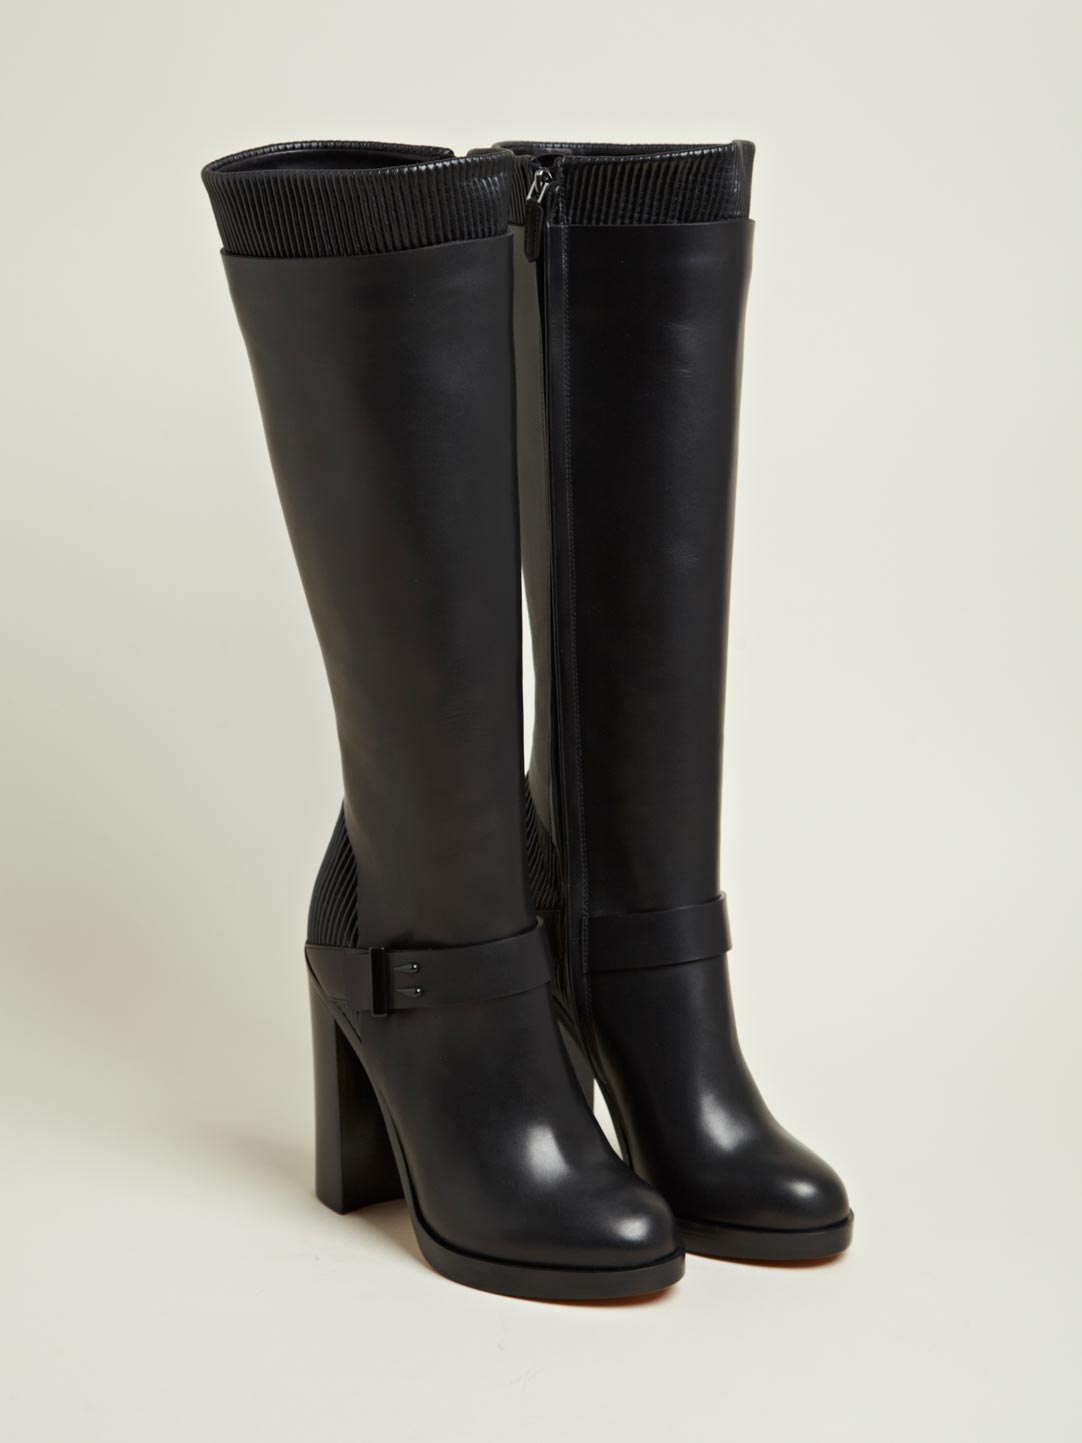 Lyst - Givenchy Givenchy Womens Calf Leather Heeled Long Boots in Black